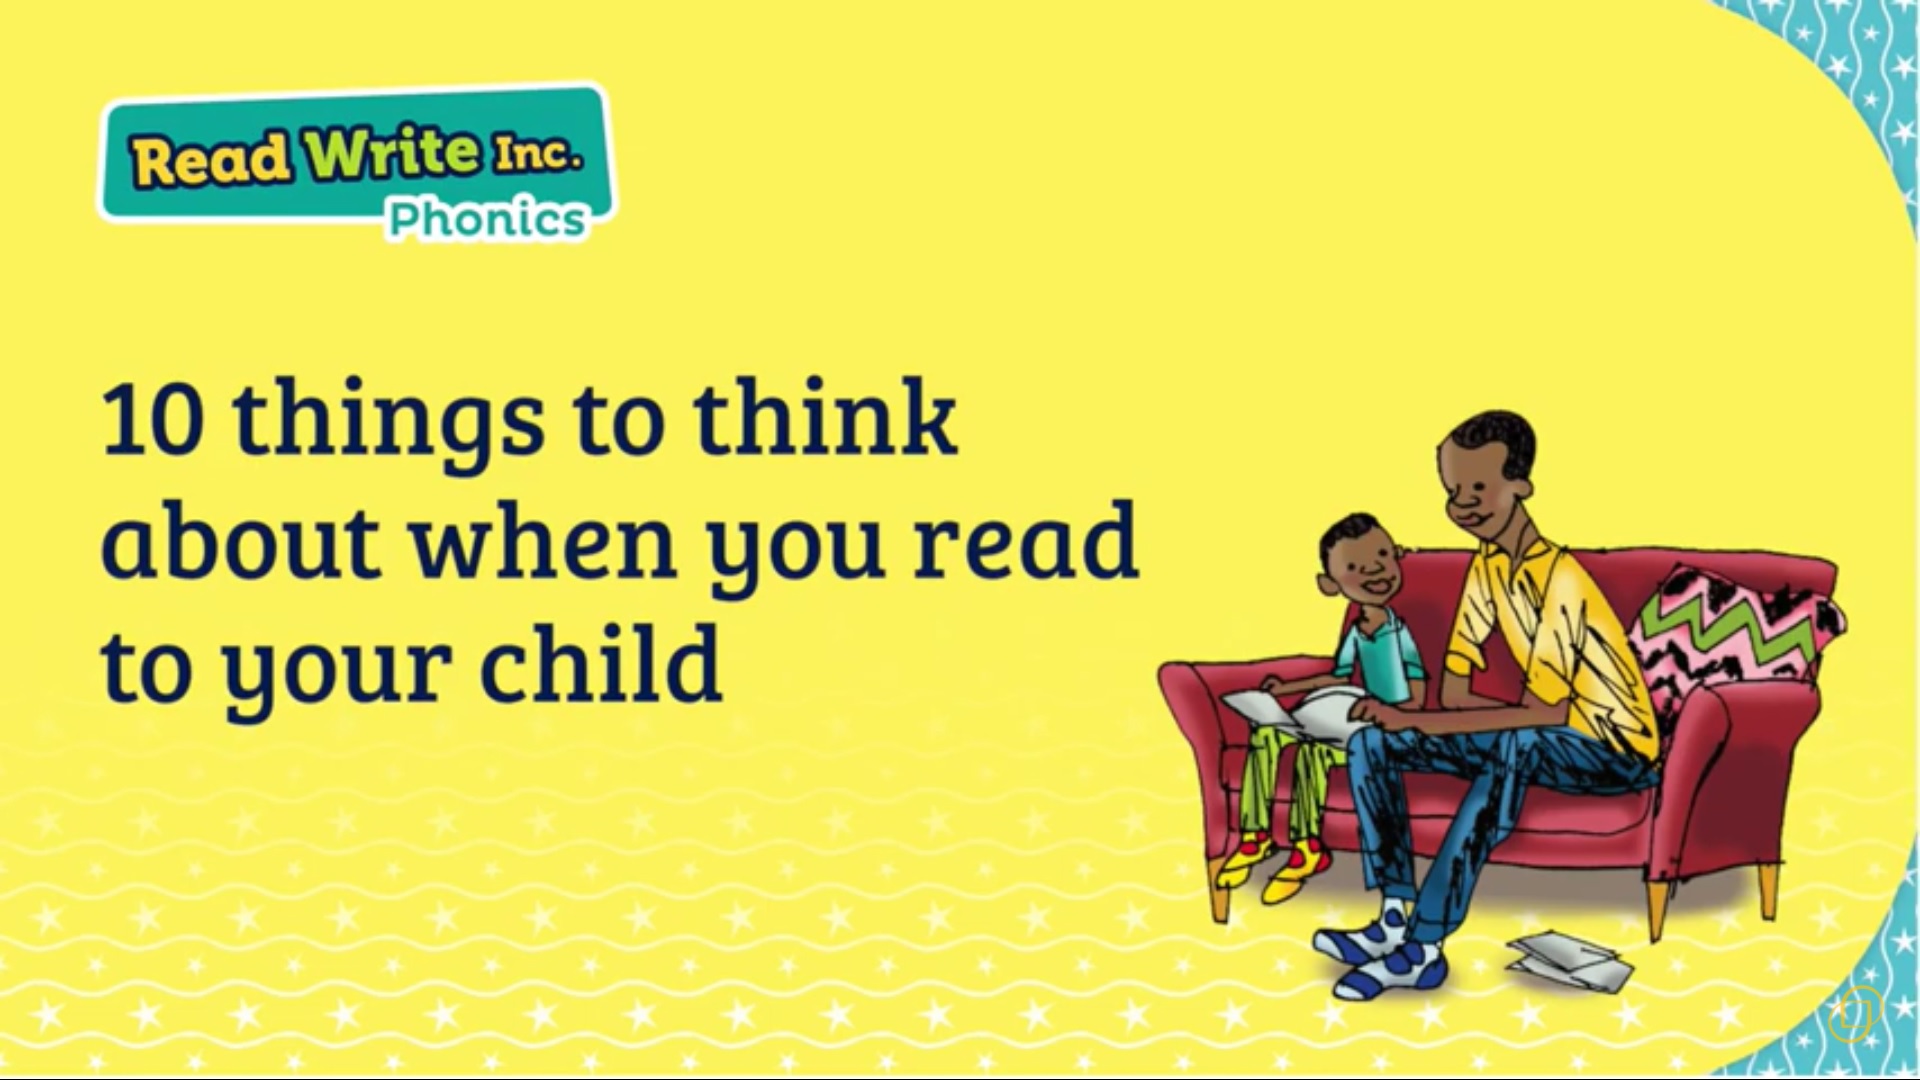 video title reading 10 things to think about when you read to your child